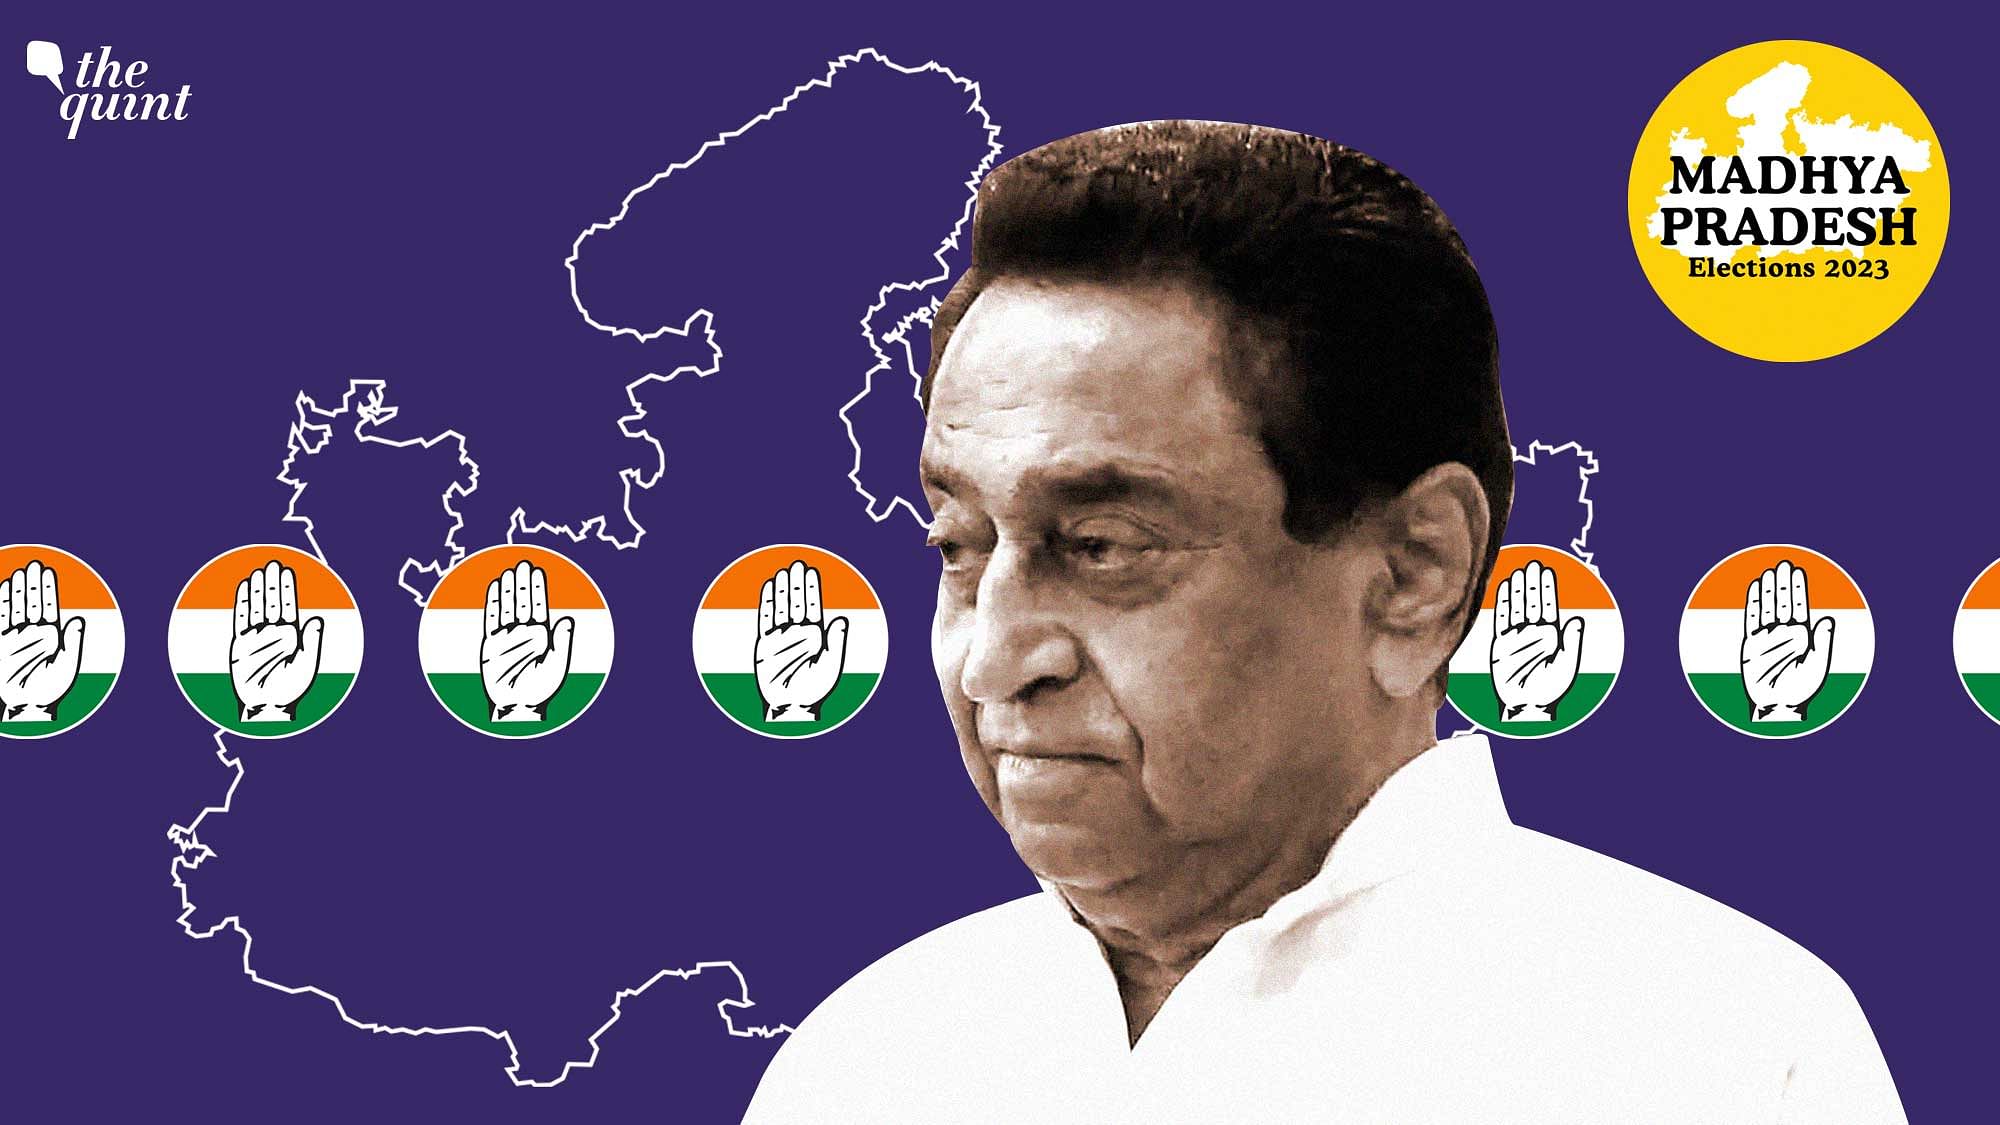 <div class="paragraphs"><p>The Congress party led by Kamal Nath has lost the Madhya Pradesh elections.&nbsp;</p></div>